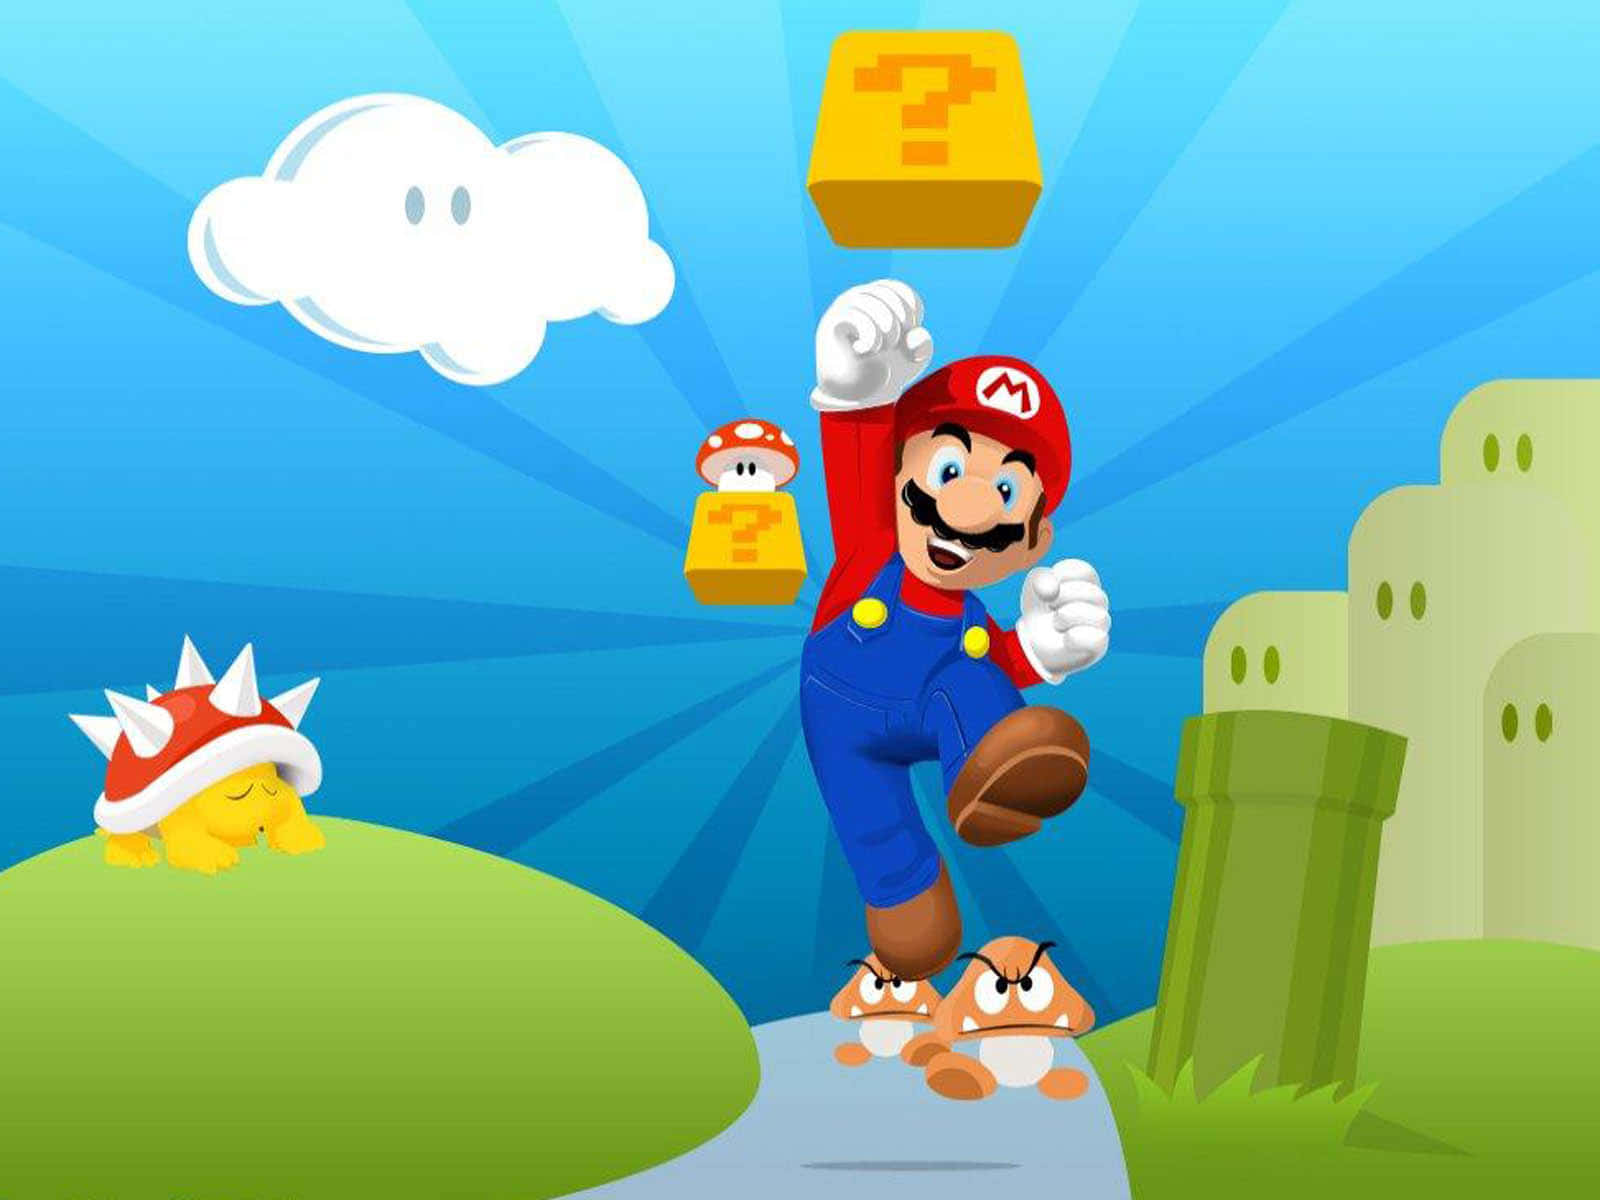 Get ready for a wild adventure with Super Mario!